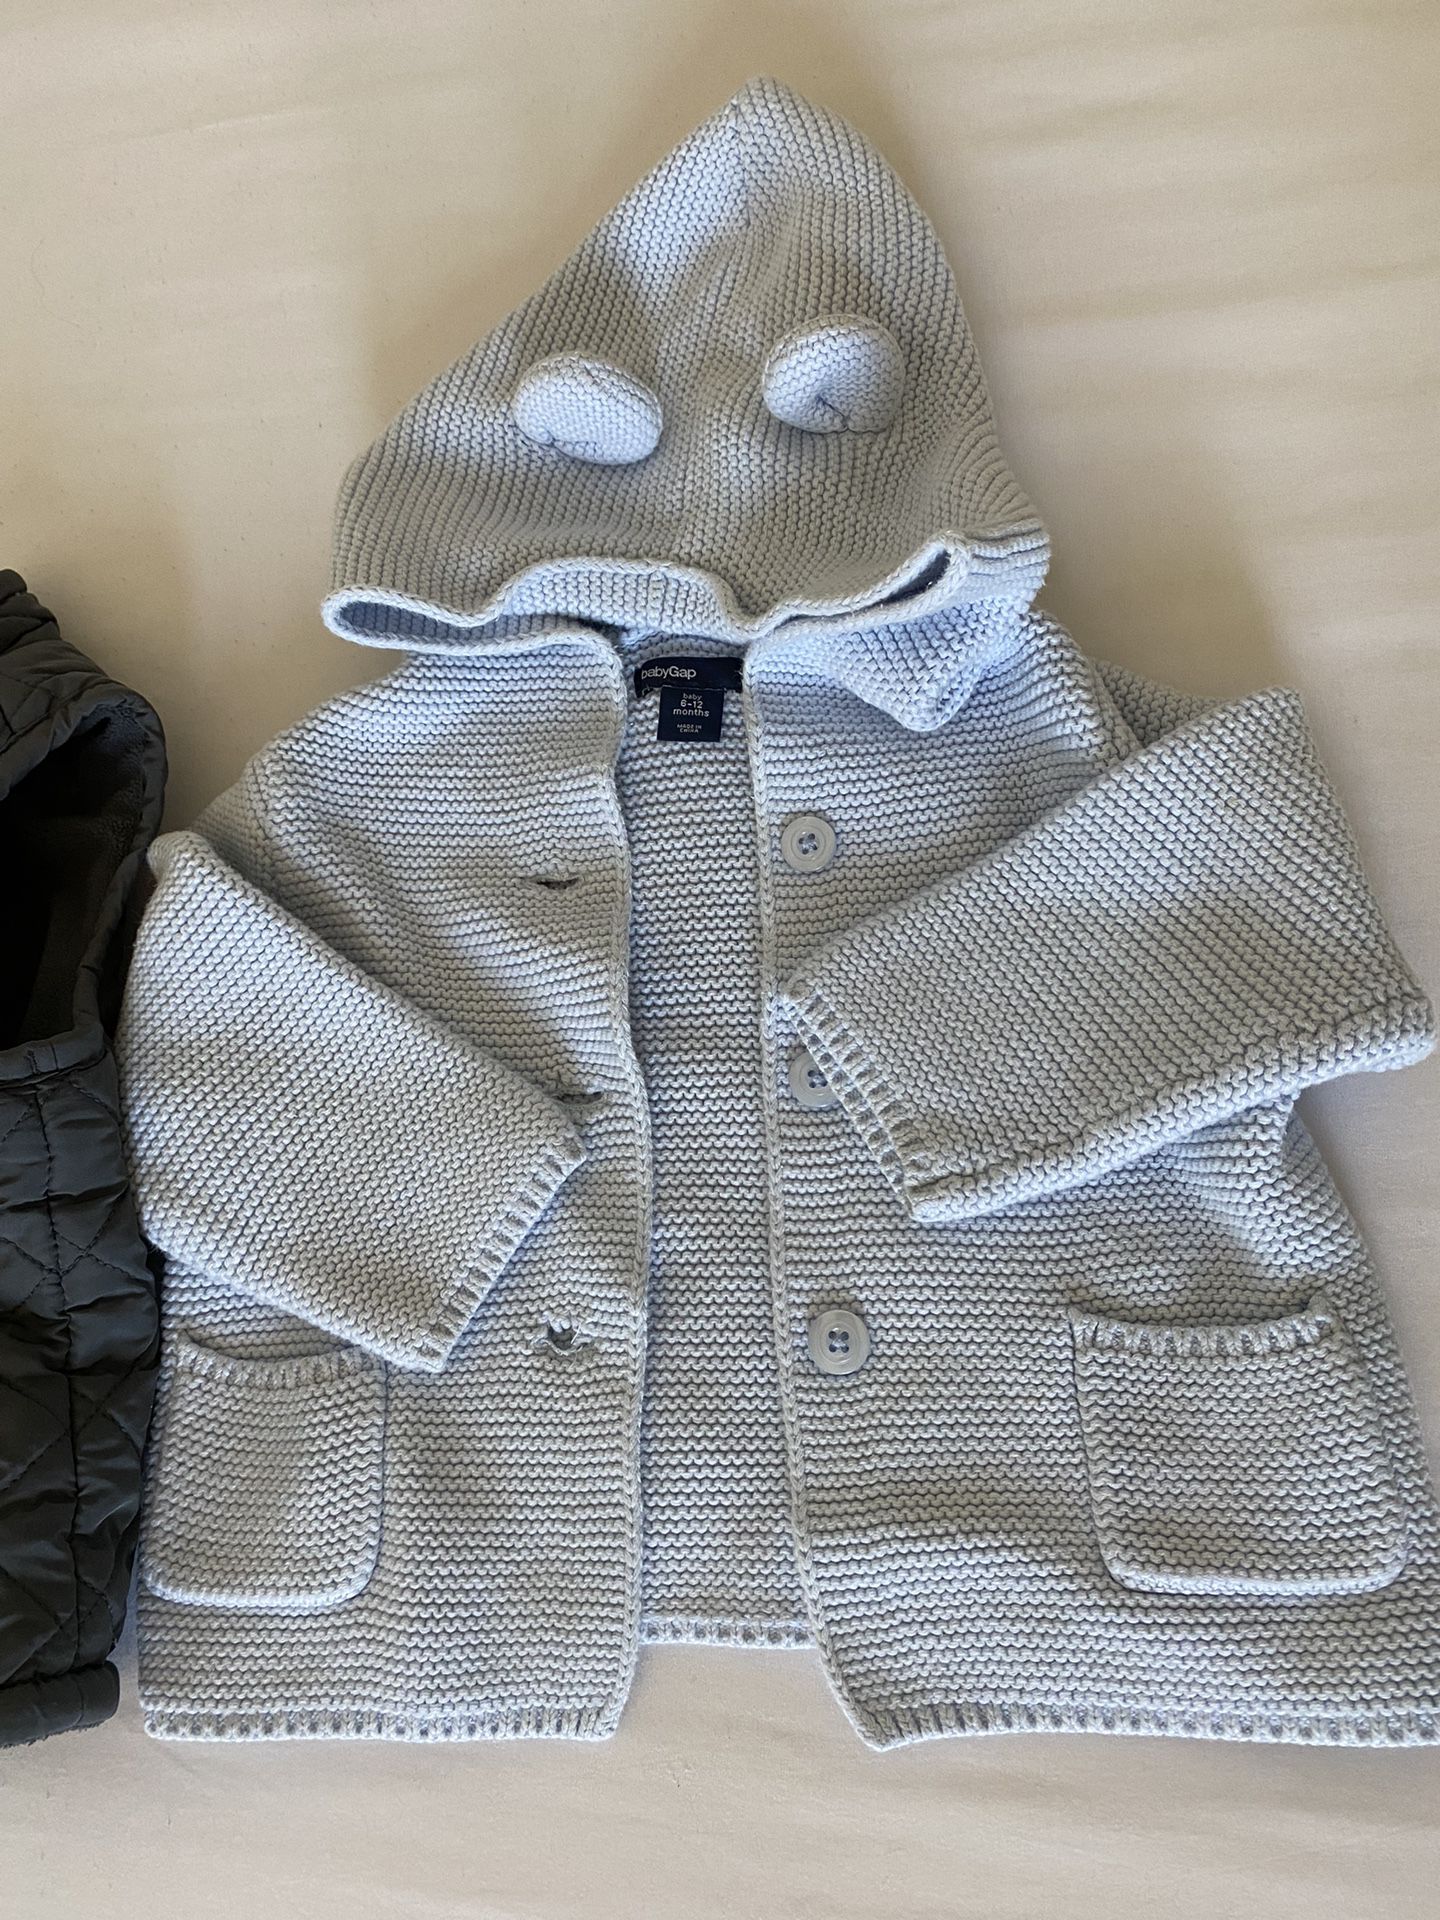 Baby Gap Brannan Bear Sweater and Old Navy Puffer Vest